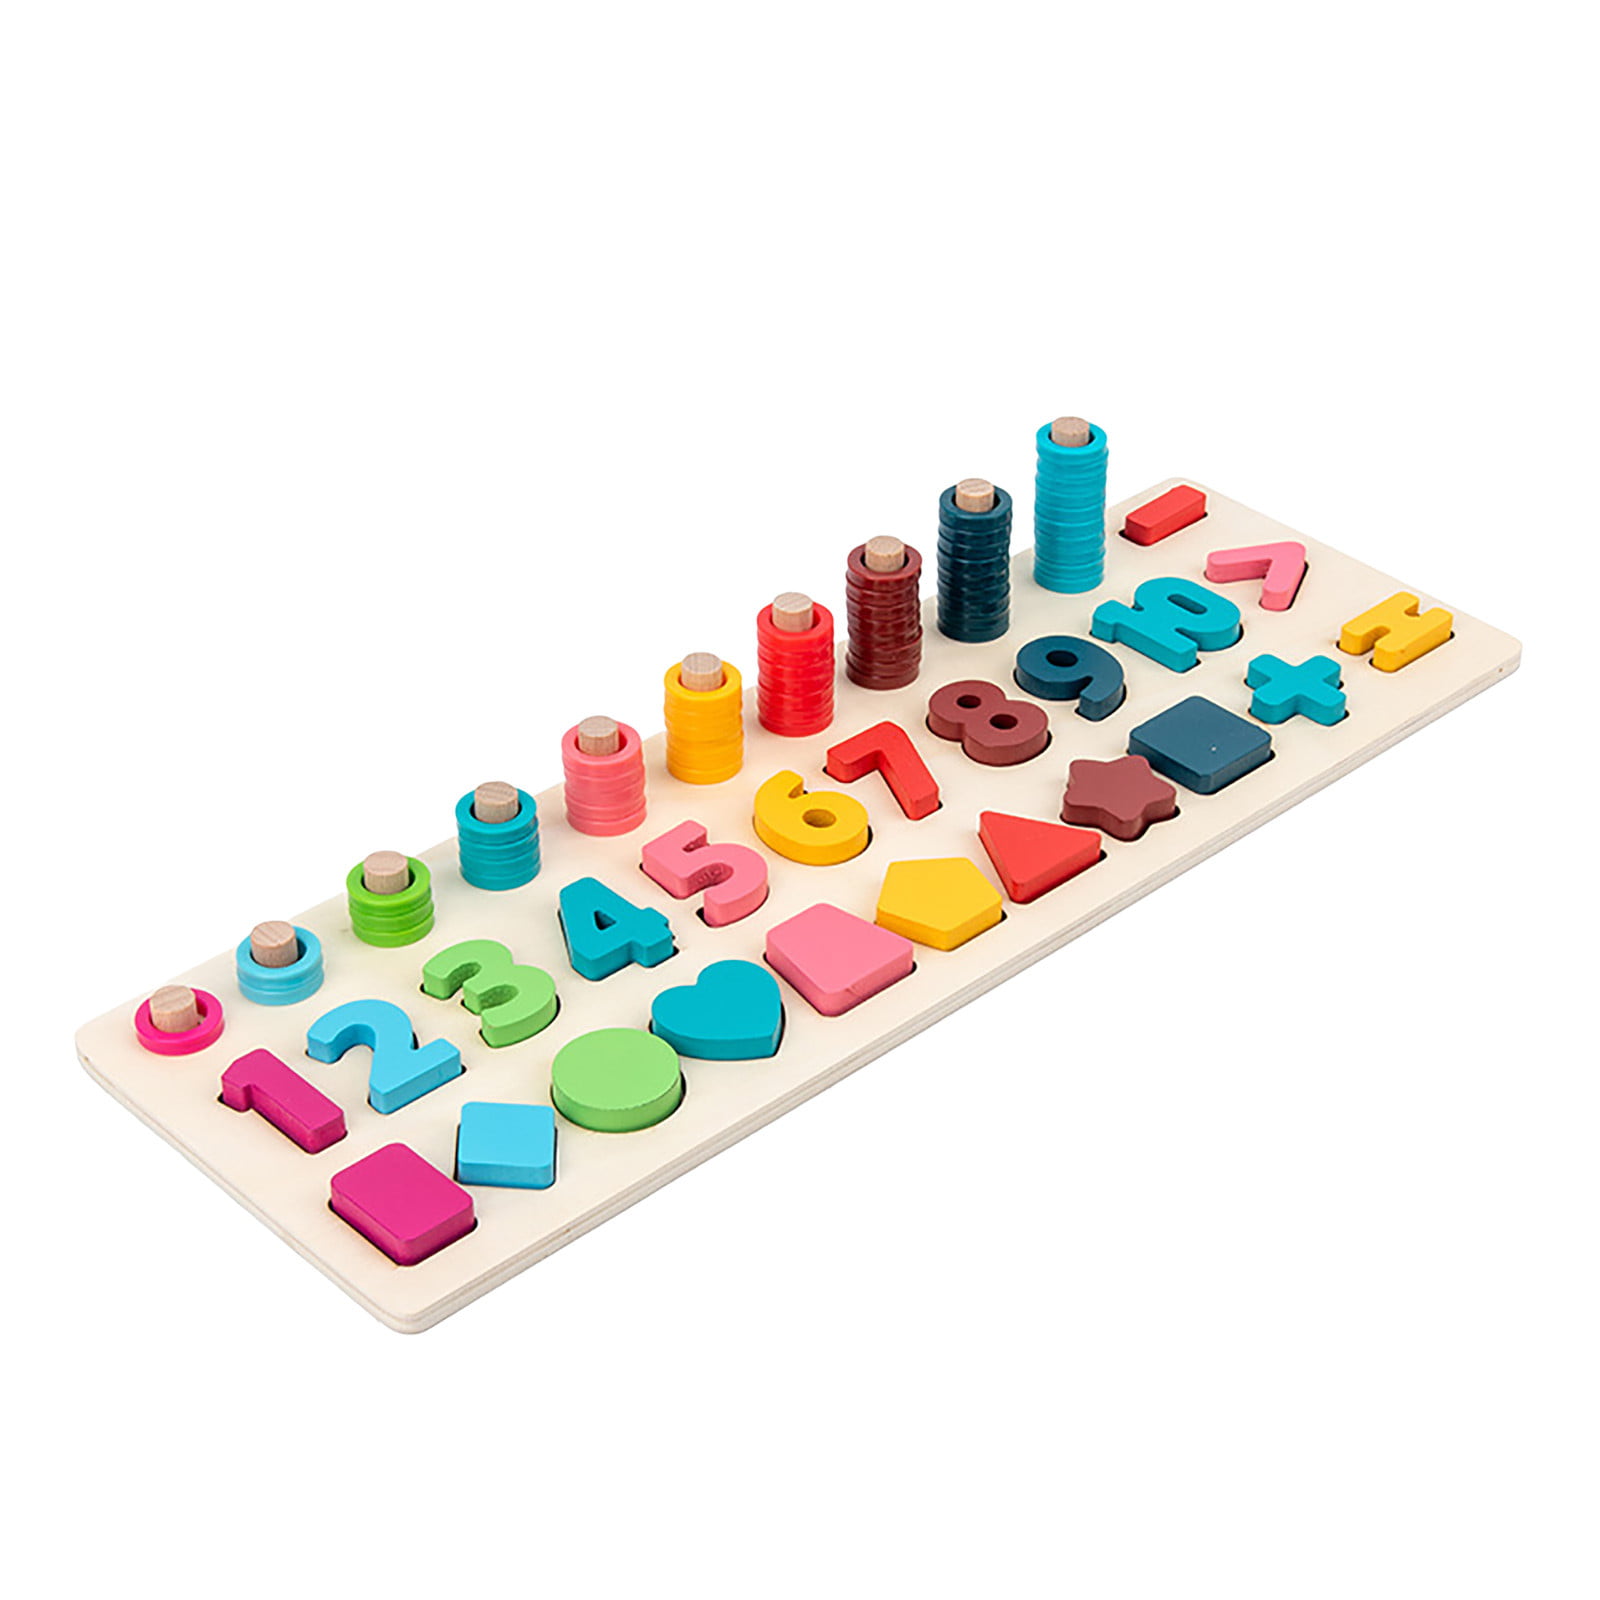 1/2" X 3/4" Plastic Colorful Counting Stacker Building Blocks 400 Pack 